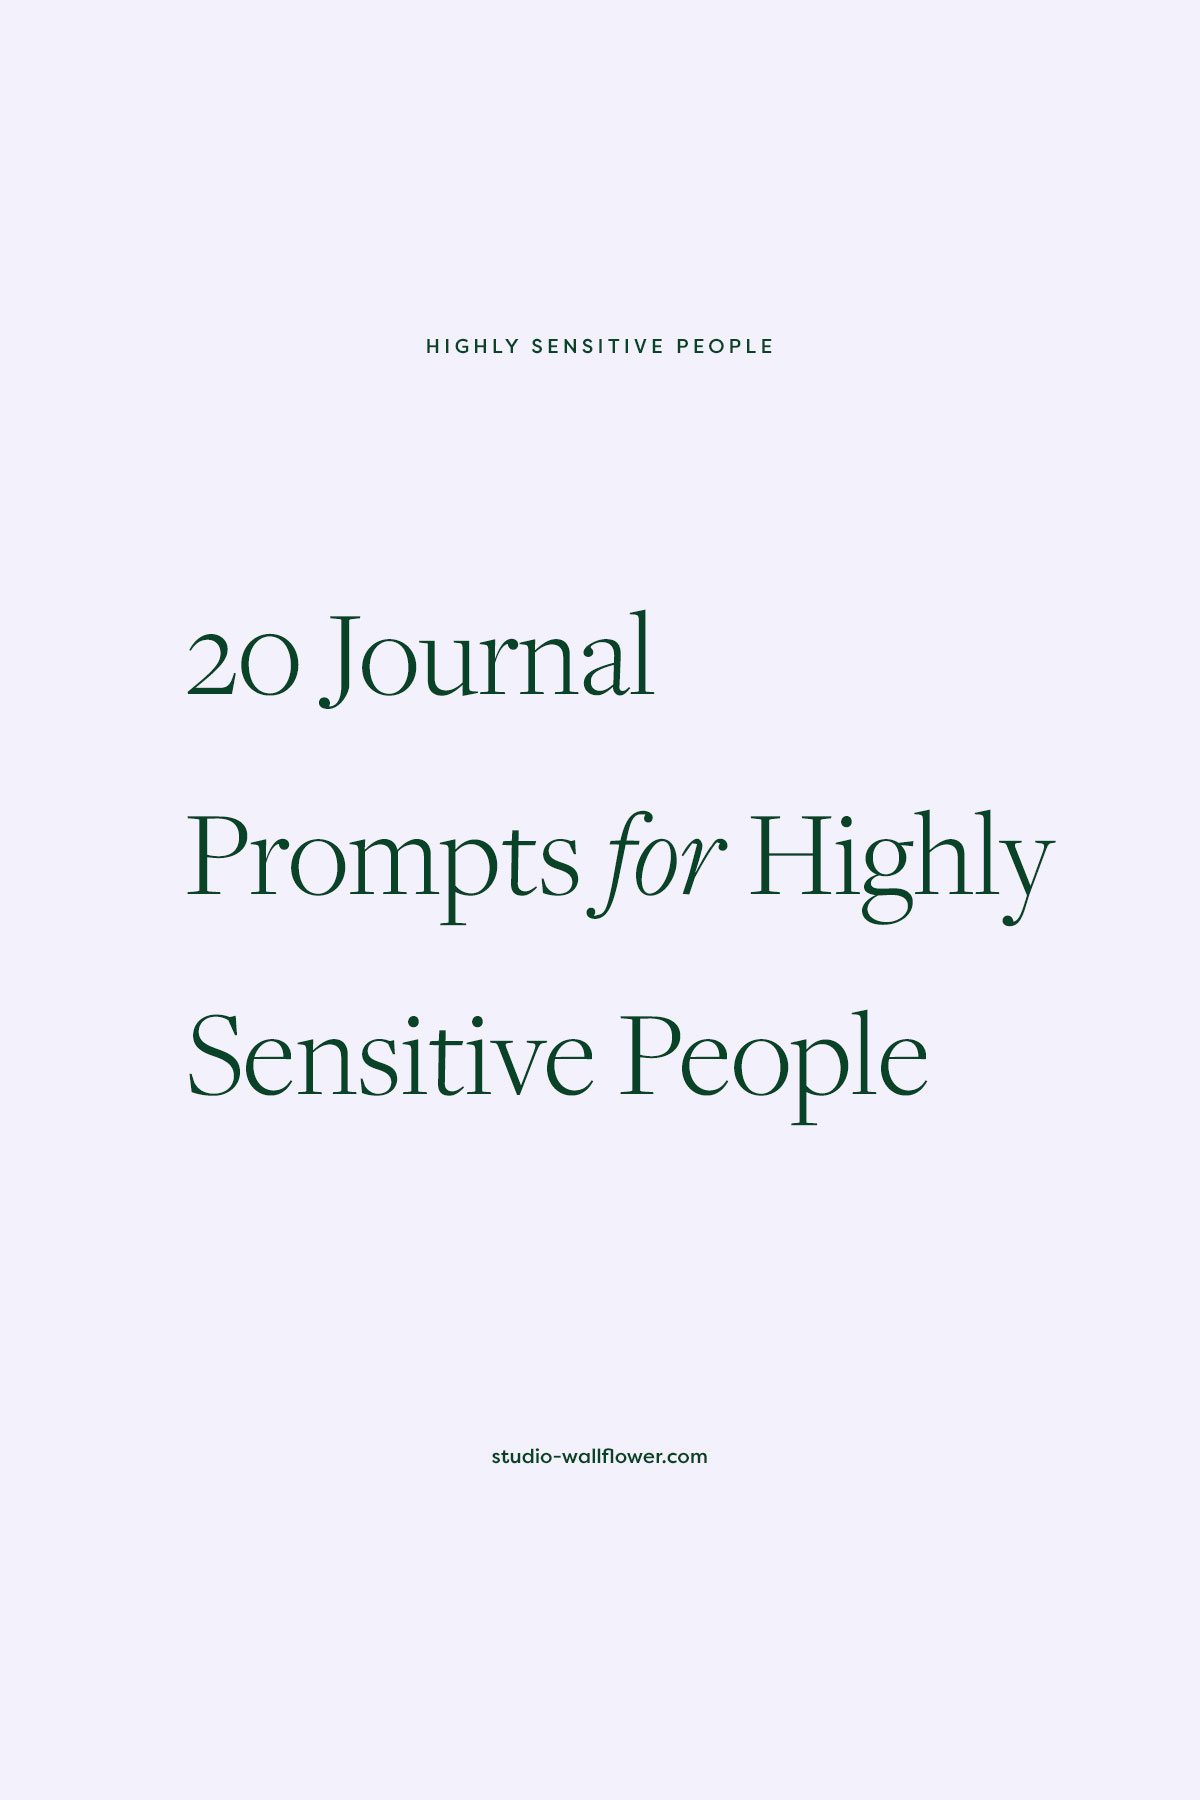 20 journal prompts for highly sensitive people